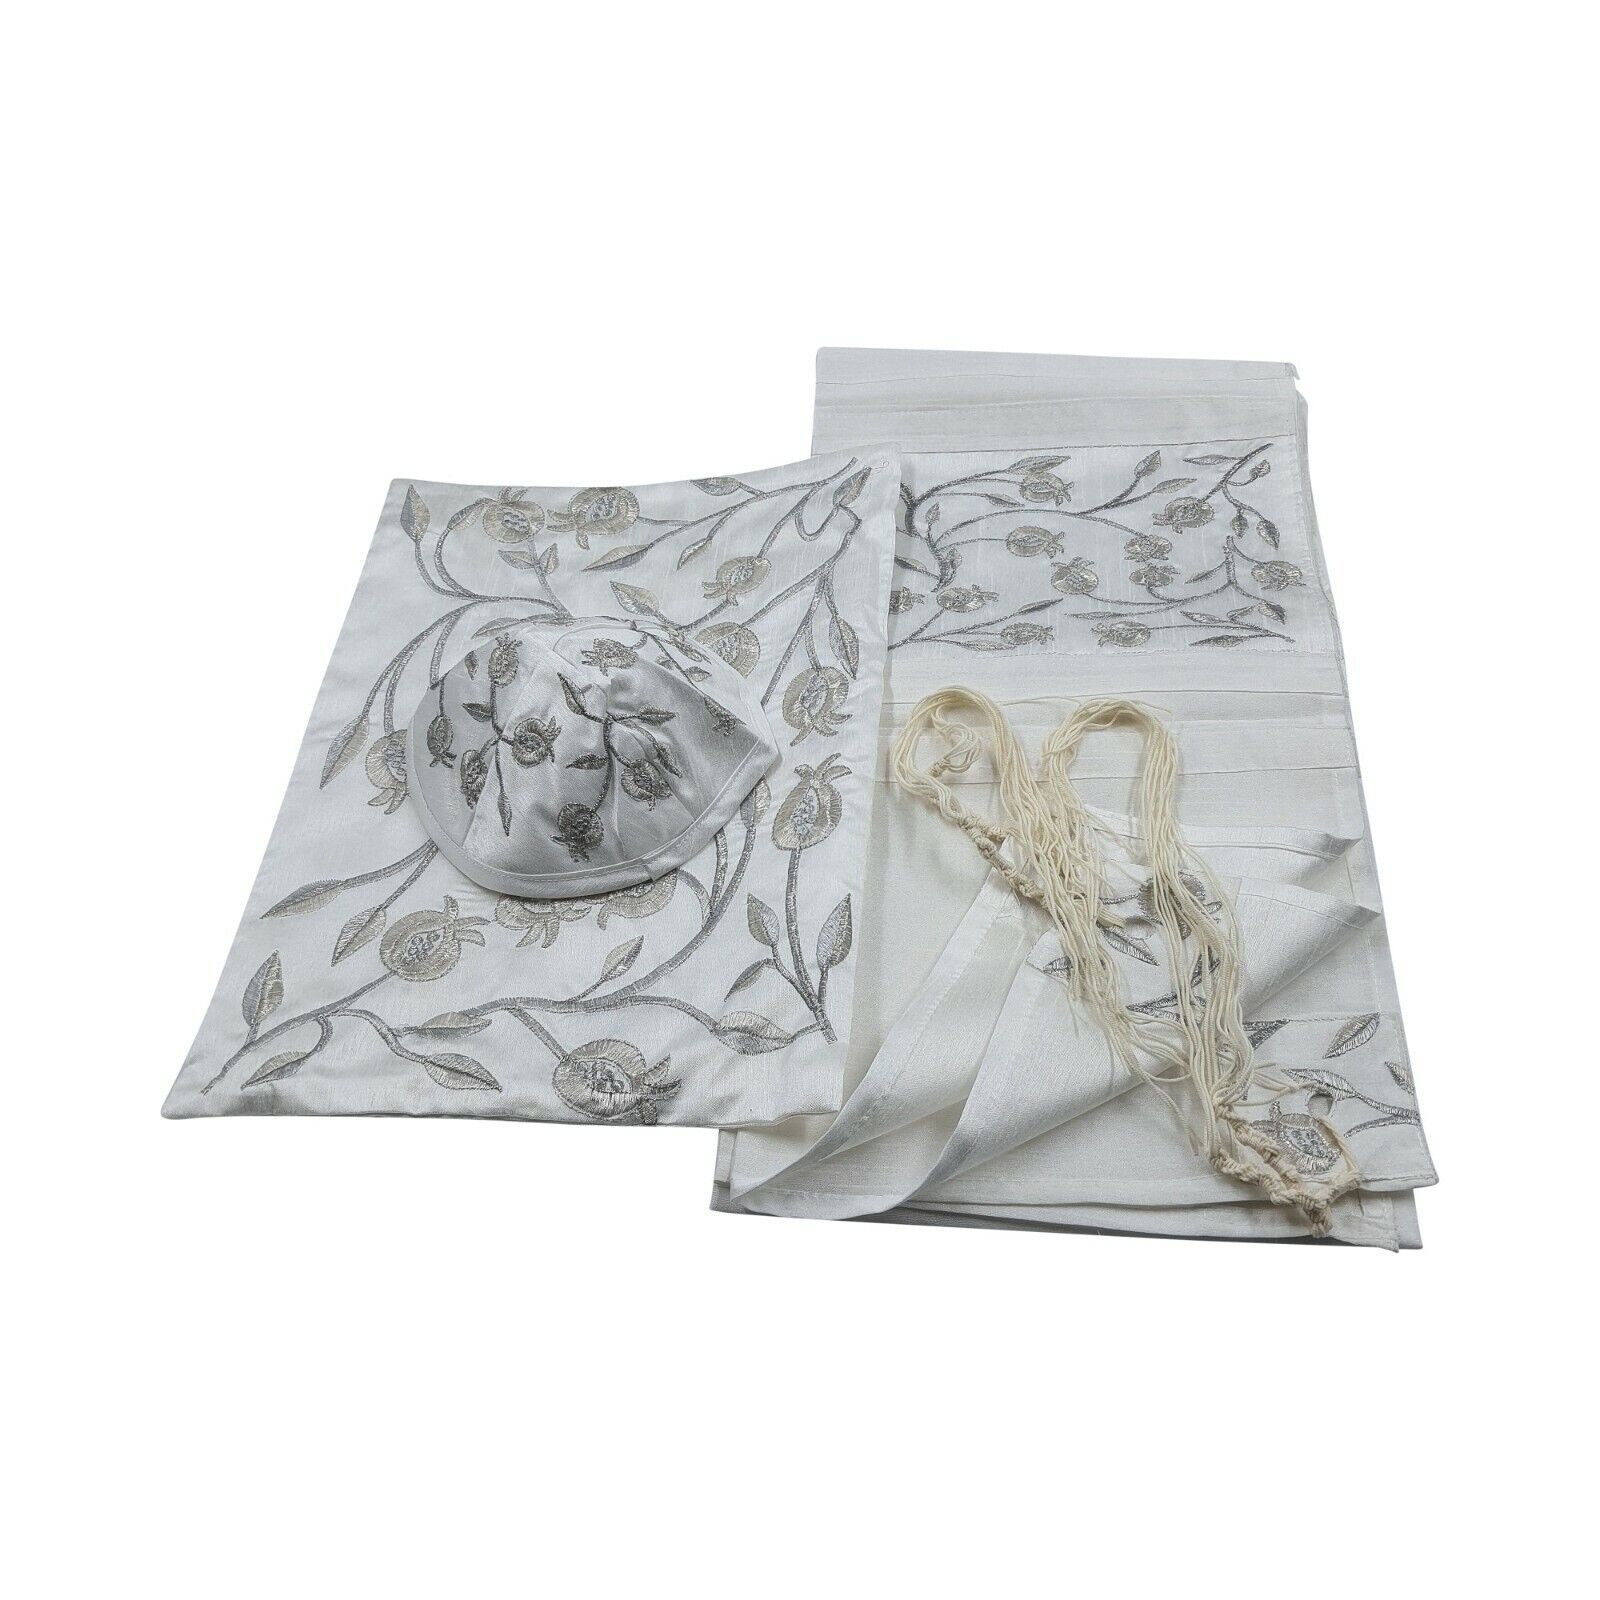 Tallit Prayer Shawl For Women 100% Kosher Embroidered WitH Flowers Judaica Gift